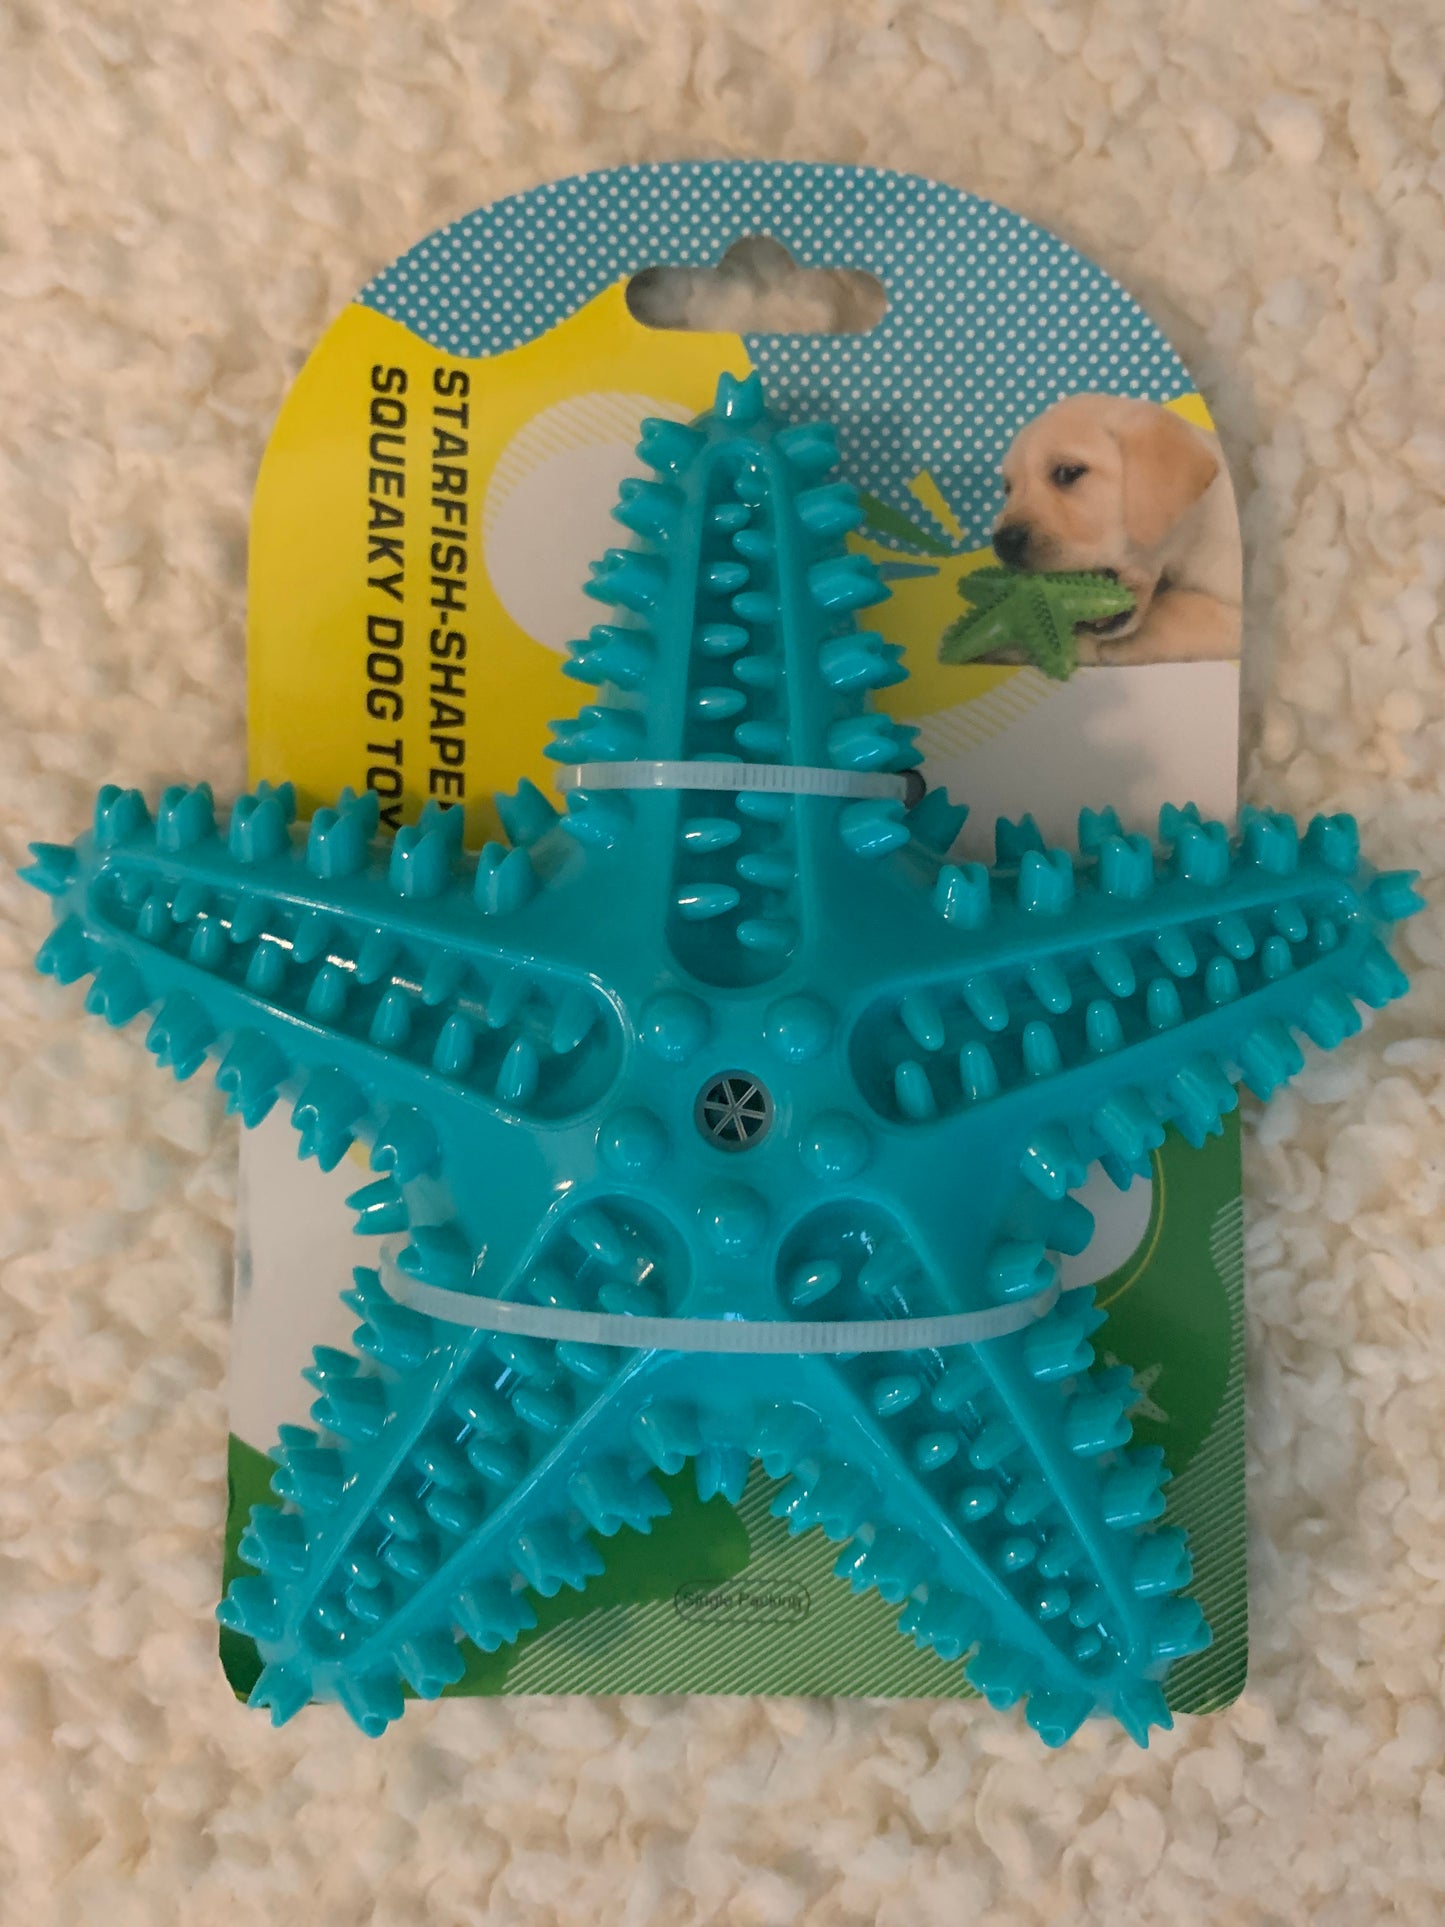 Blue Starfish - Dog / Puppy Chew Toy - Tough, Durable, Squeaky, Interactive Toy!